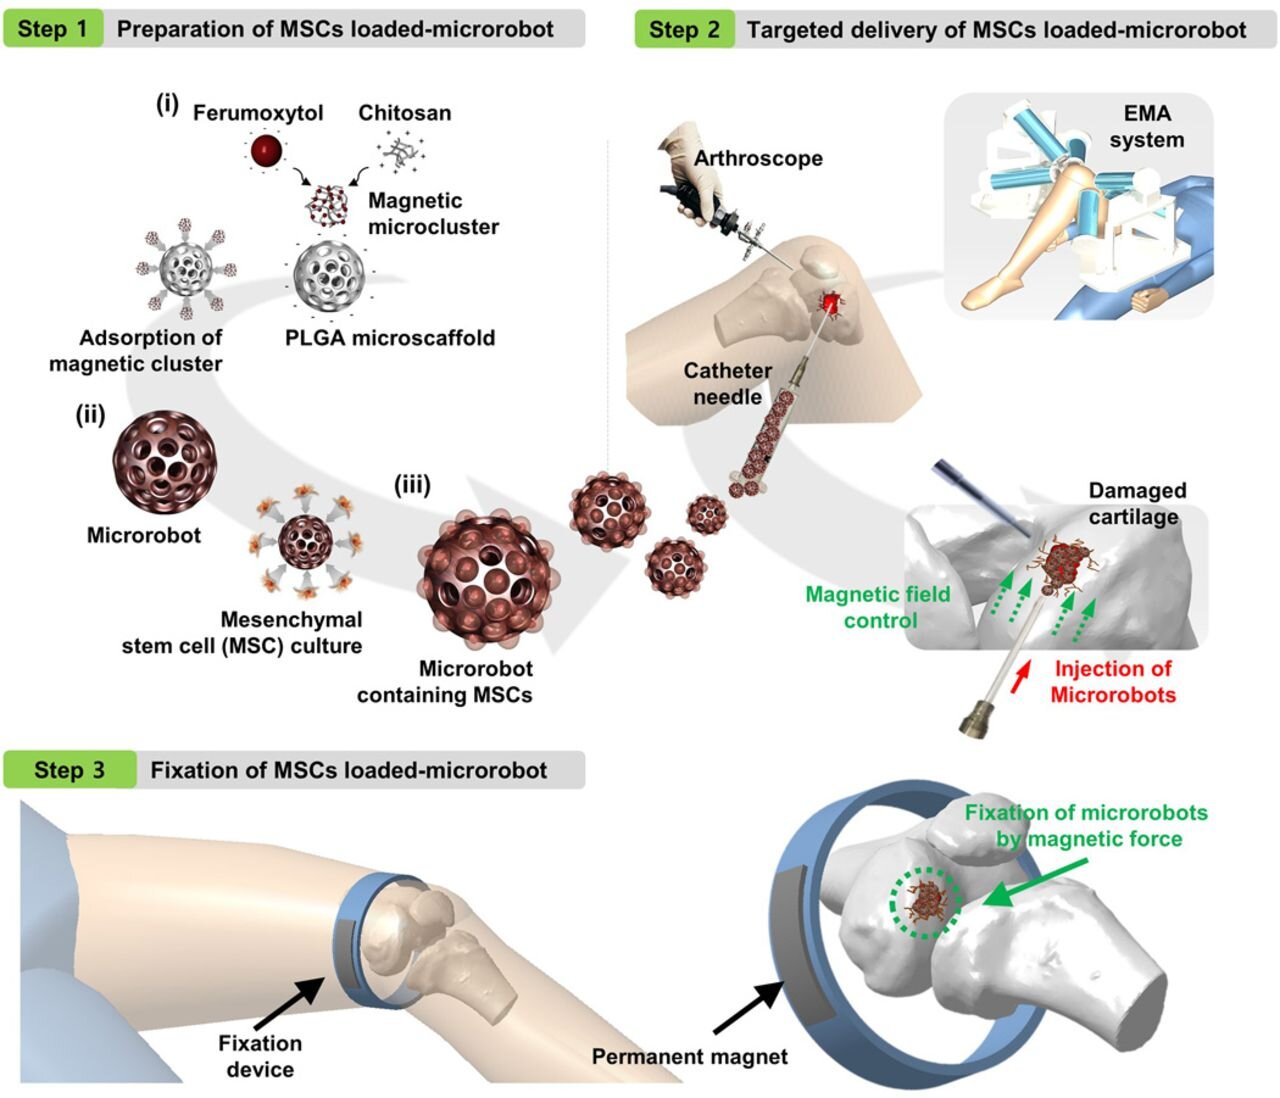 Concept overview of knee cartilage regeneration procedures using magnetic microrobot-mediated MSC delivery system. The magnetic microrobot containing MSCs was prepared through a sequential process by adsorption of magnetic microclusters on the PLGA microscaffold and MSCs loading (step 1). The prepared MSC-loaded microrobots were delivered to cartilage defect using EMA system (step 2). After the targeted delivery procedure, the microrobots are immobilized to the defect using a permanent magnet (step 3).Source: Science Robotics (2020). DOI: 10.1126/scirobotics.aay6626